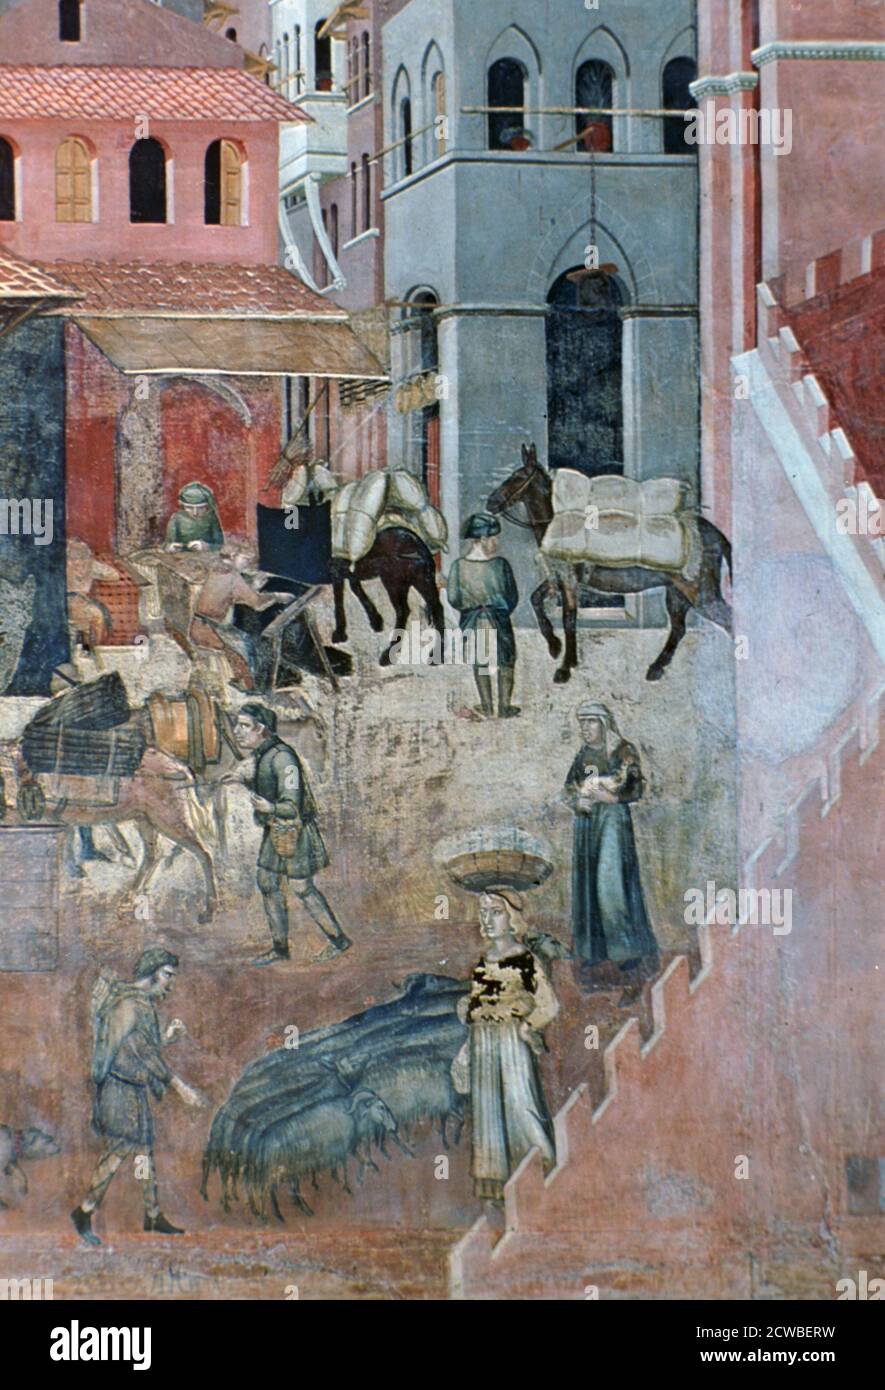 Effects of Good Government on the City Life', (detail), 1338-1340 Artist: Ambrogio Lorenzetti. Ambrogio Lorenzetti frescoed the side walls of the Council Room (Sala dei Nove) of the City Hall (Palazzo Pubblico) of Siena. The subject of the frescoes are Good and Bad Government. Stock Photo